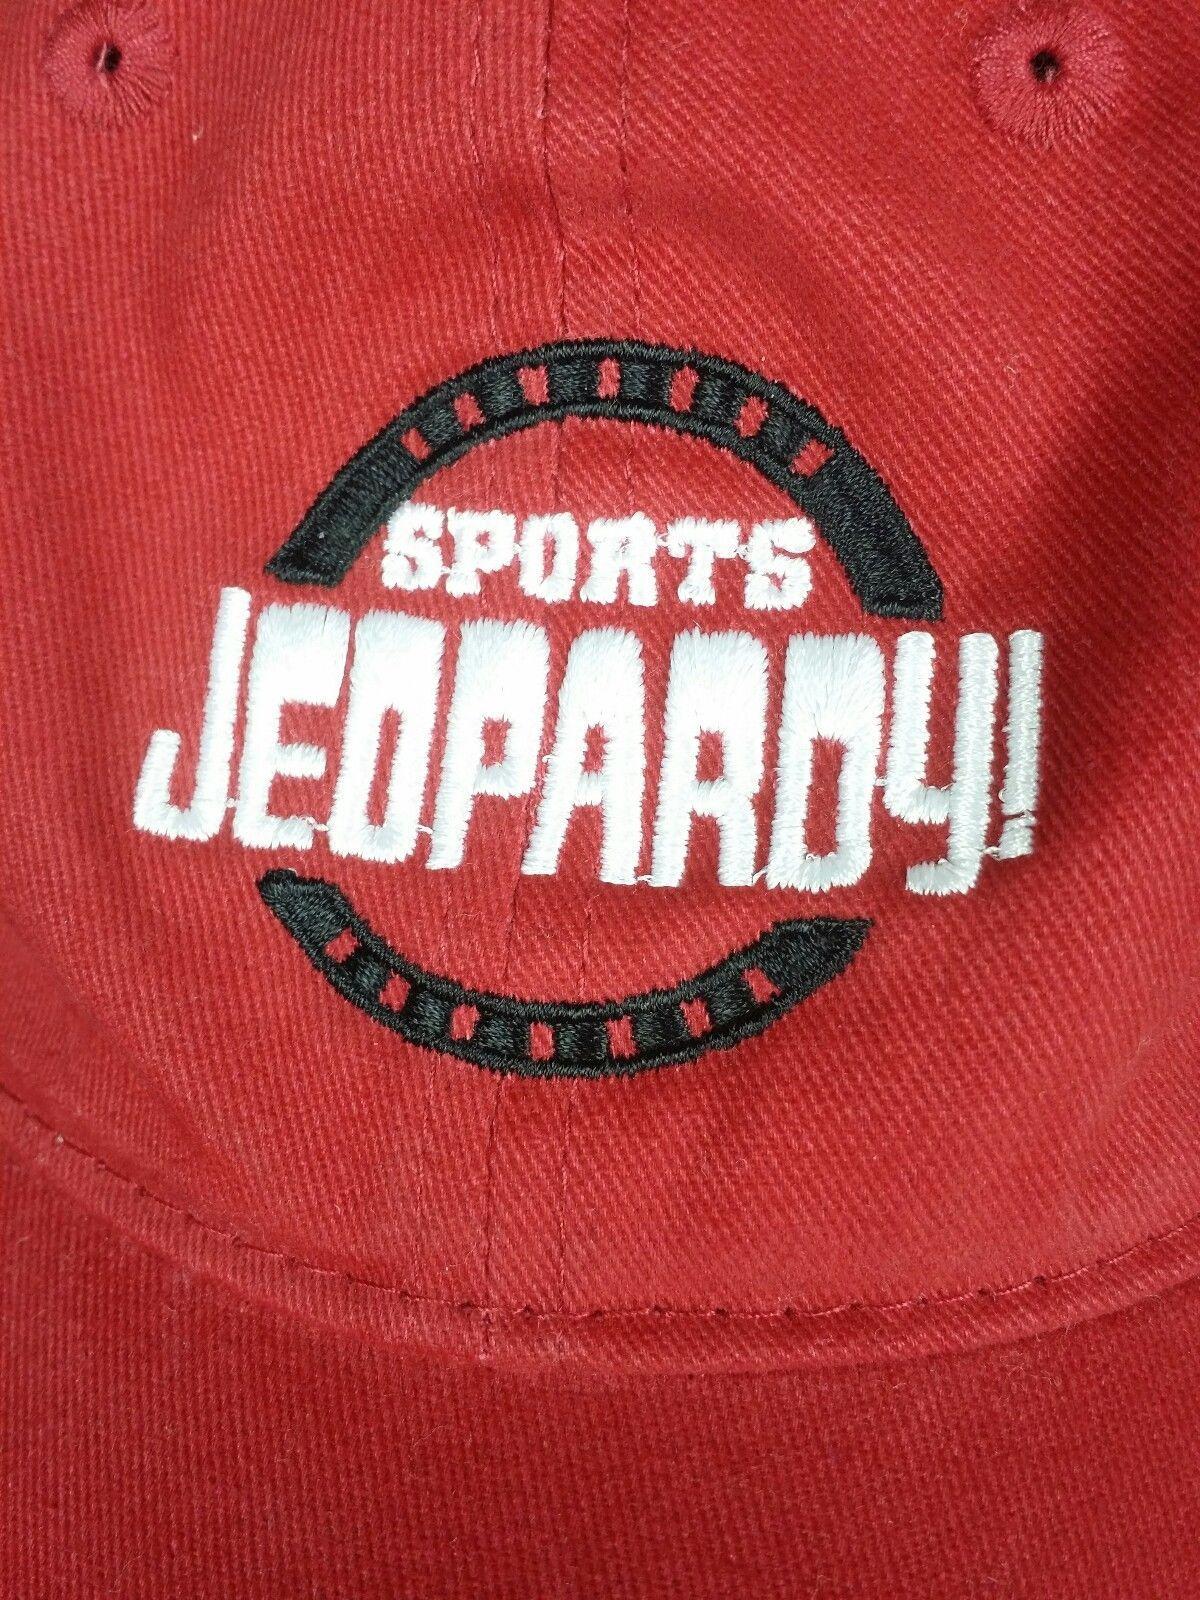 Jeopardy Game Show Logo - Sports Jeopardy Game One Show NBC Adjustable Adult One Game Size Hat ...